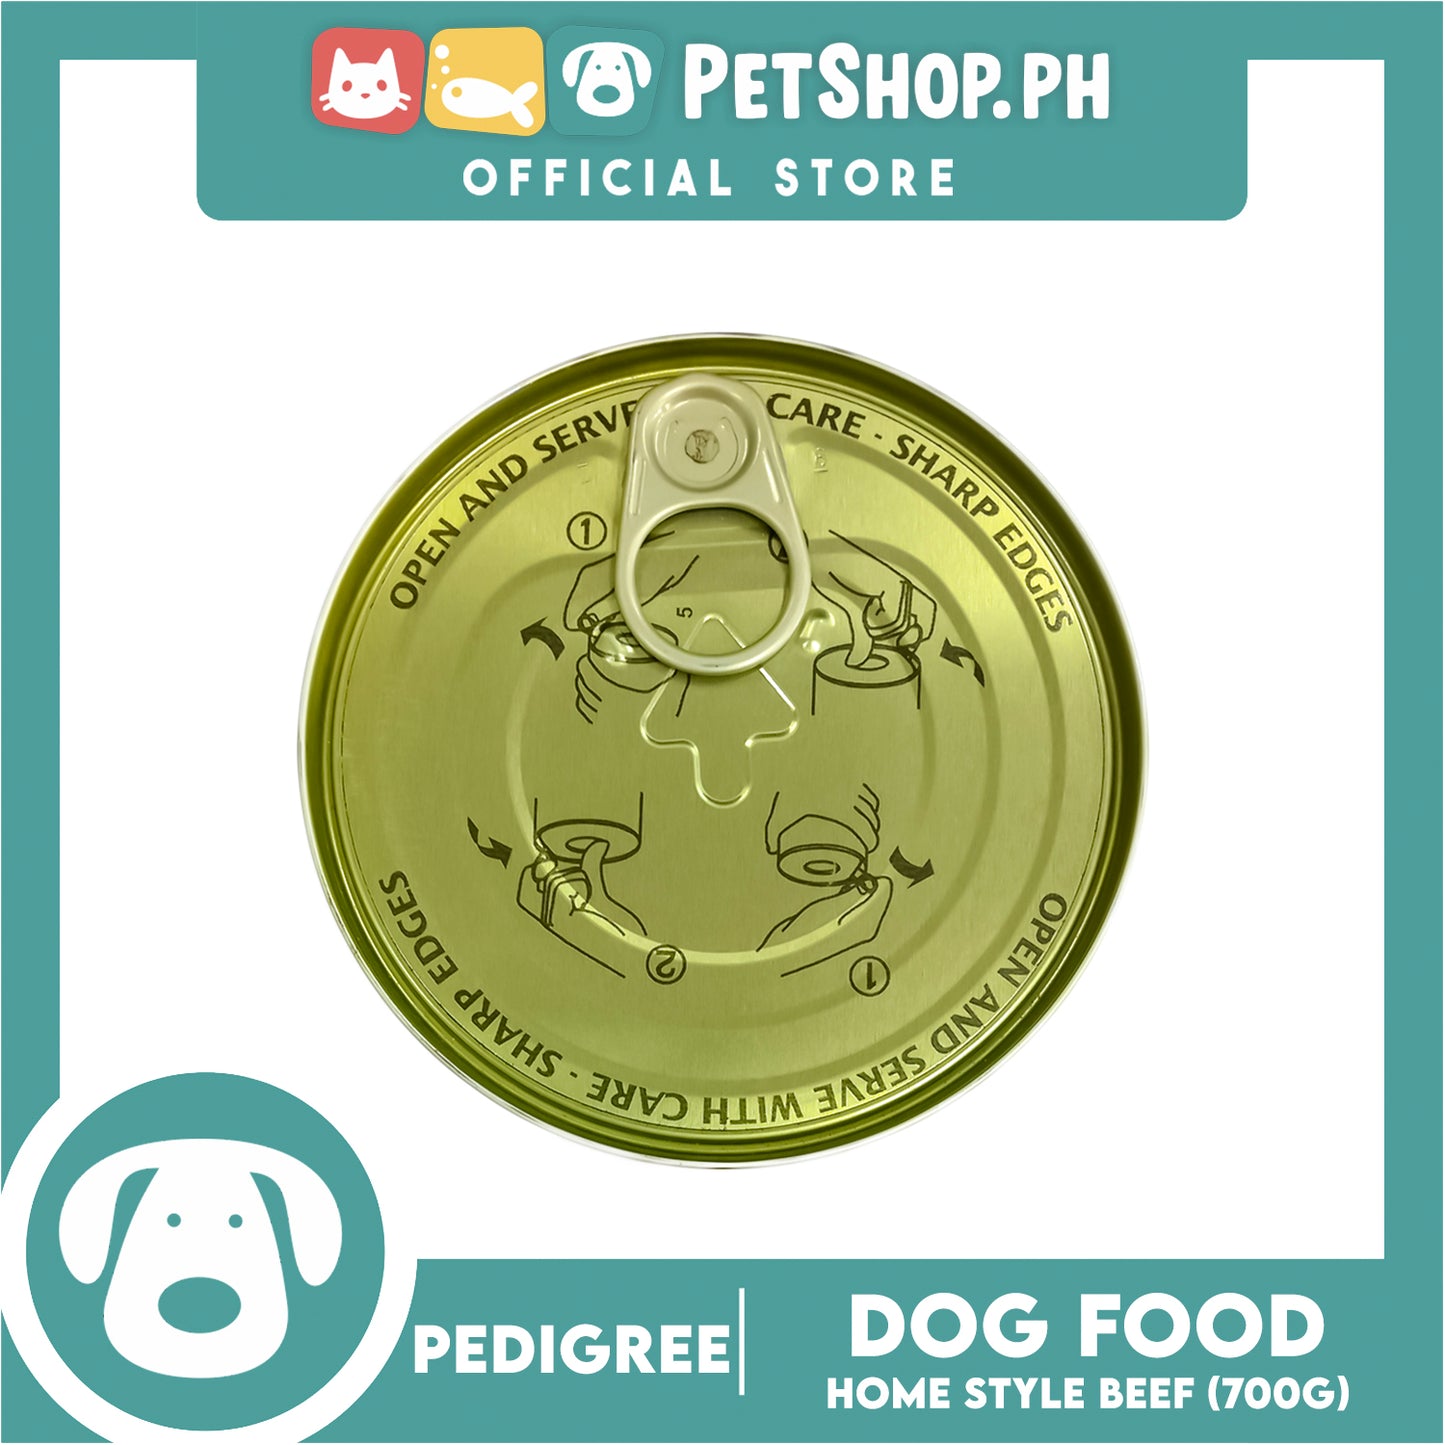 Pedigree Home Style Beef 700g Made From Real Meat, Canned Dog Food